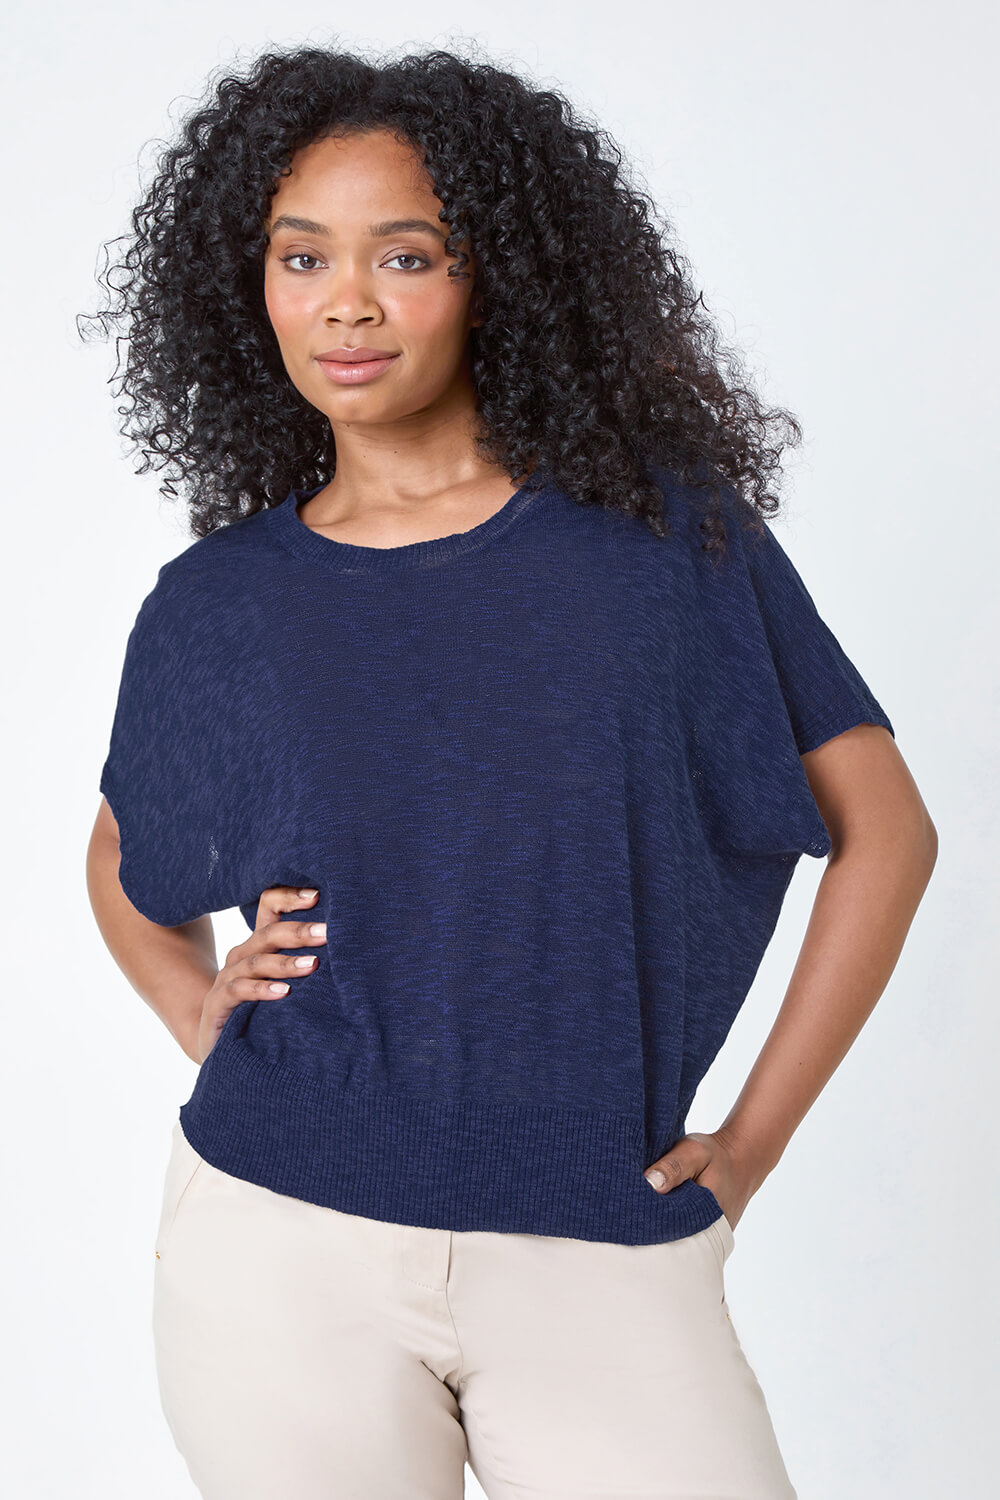 Navy  Petite Cotton Blend Textured Knit Top, Image 4 of 5